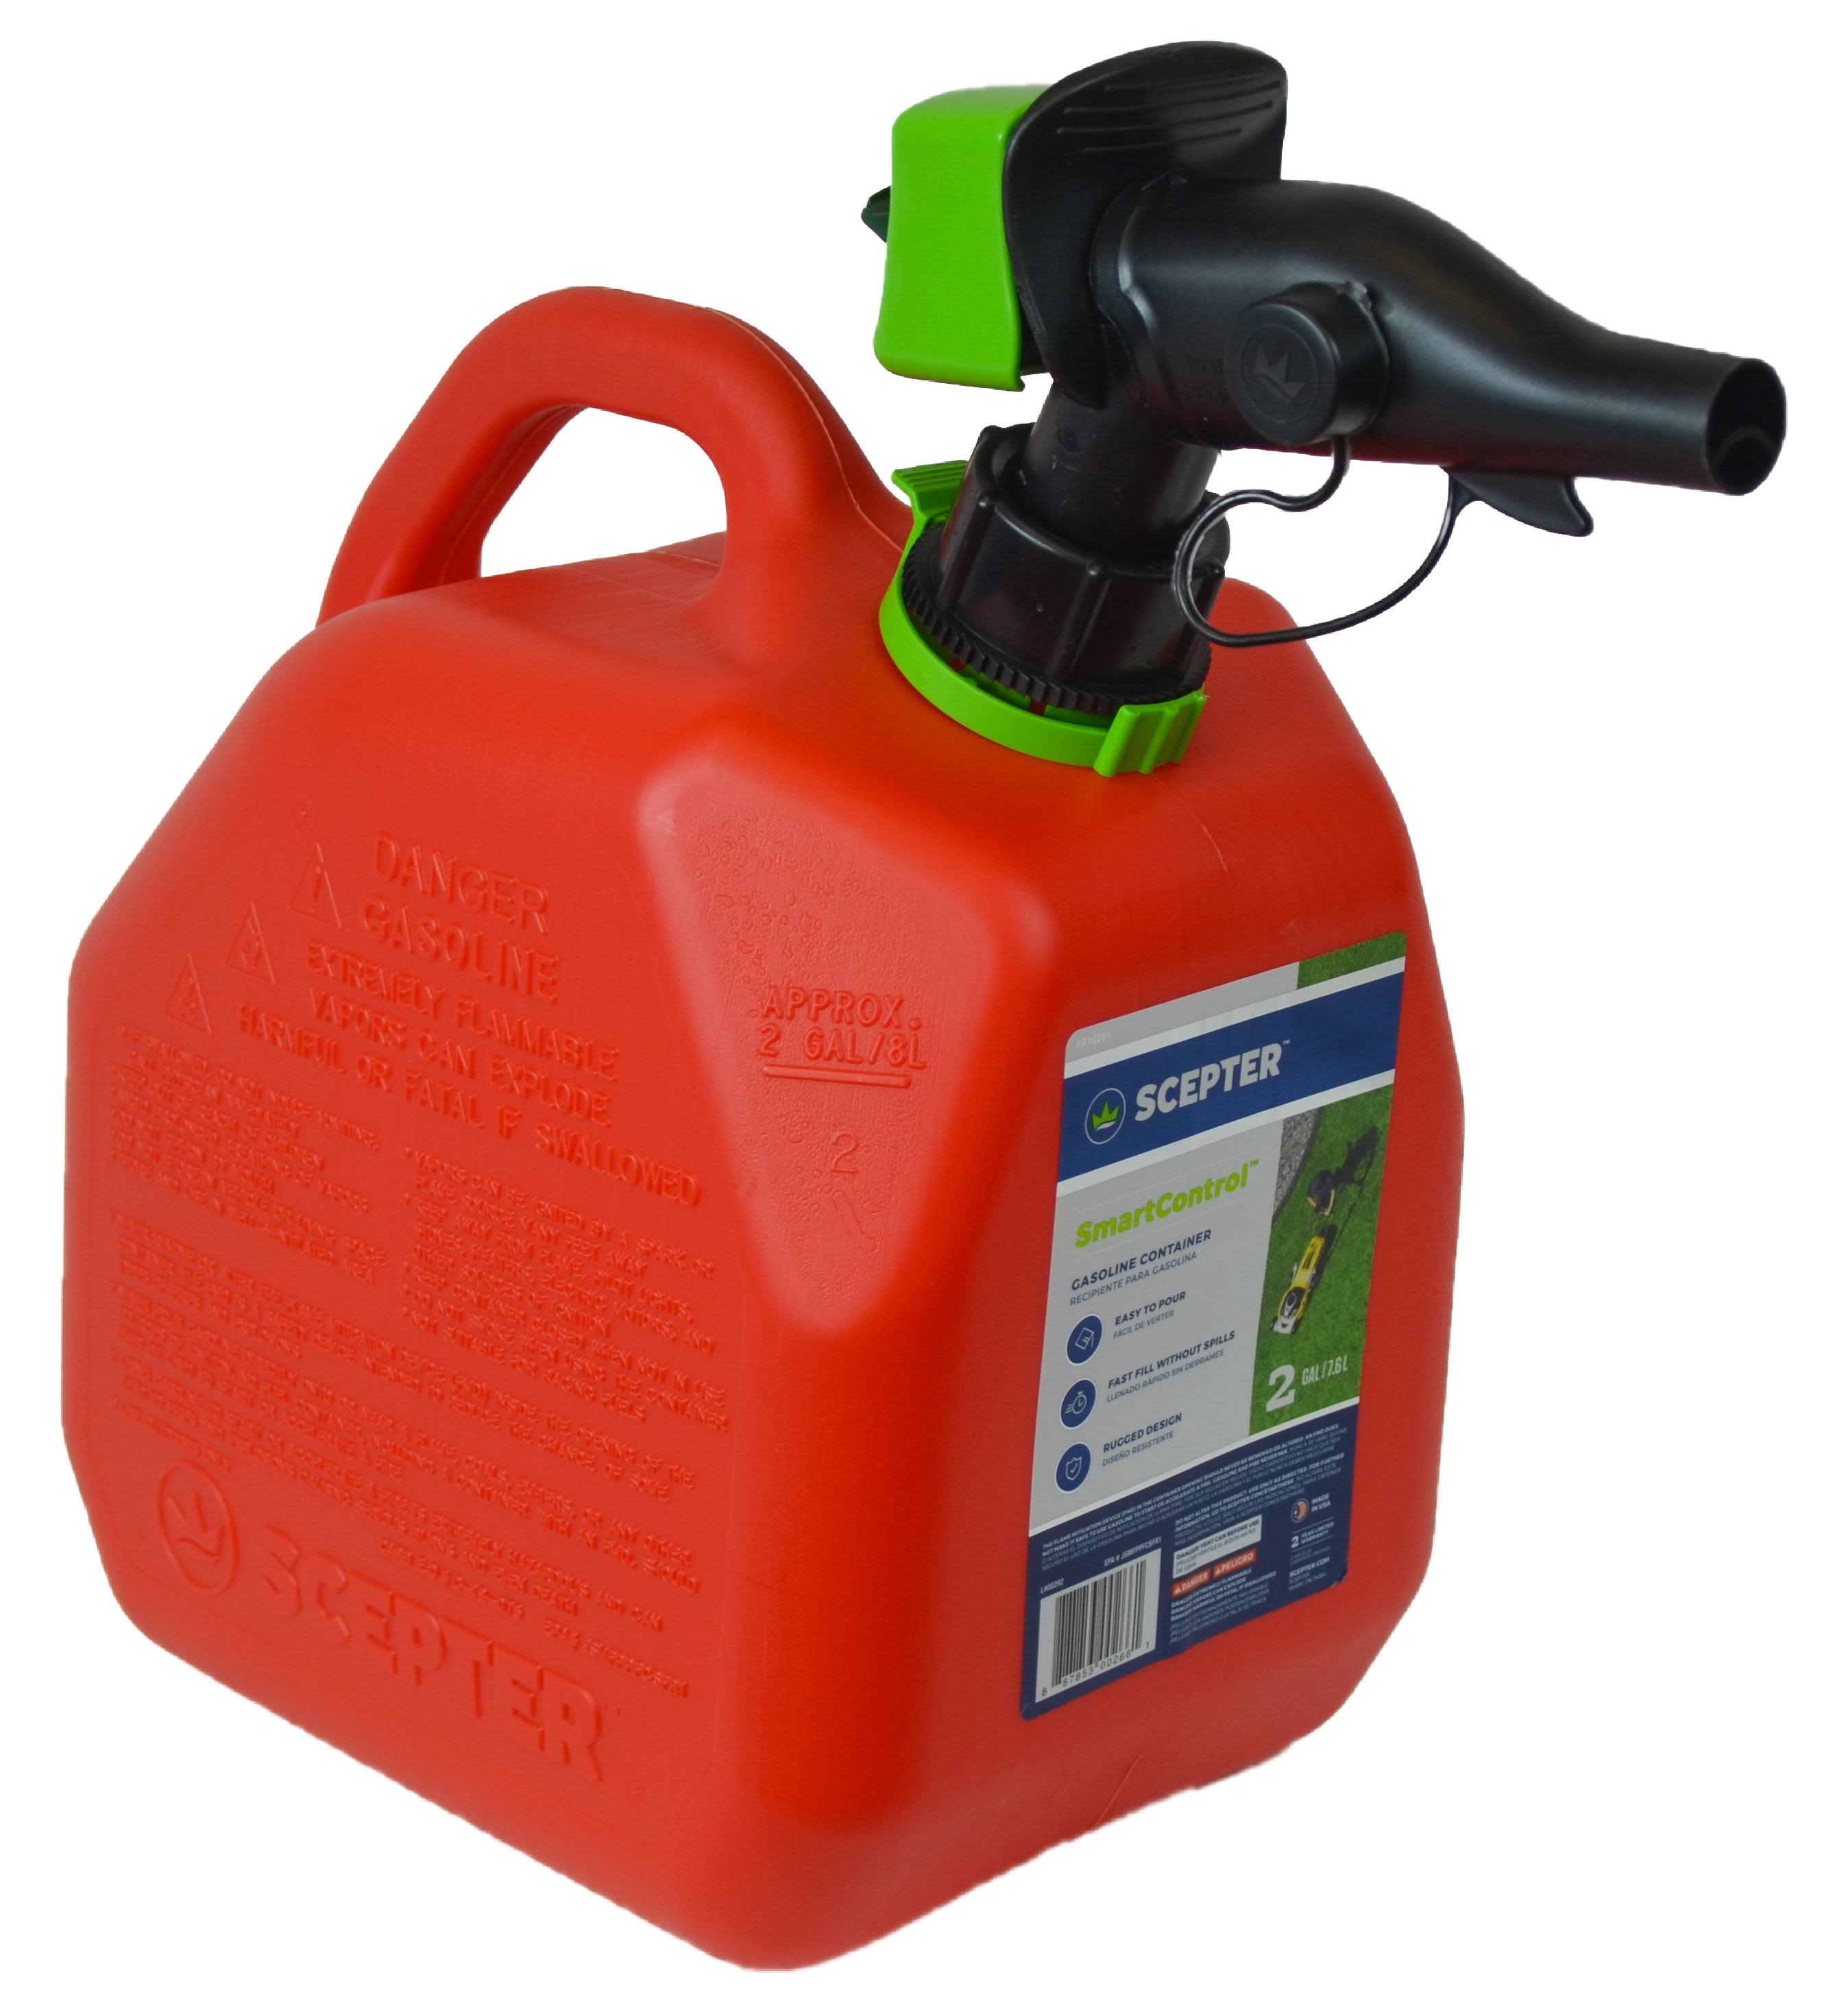 Scepter Smart Control Gas Can - 2gal